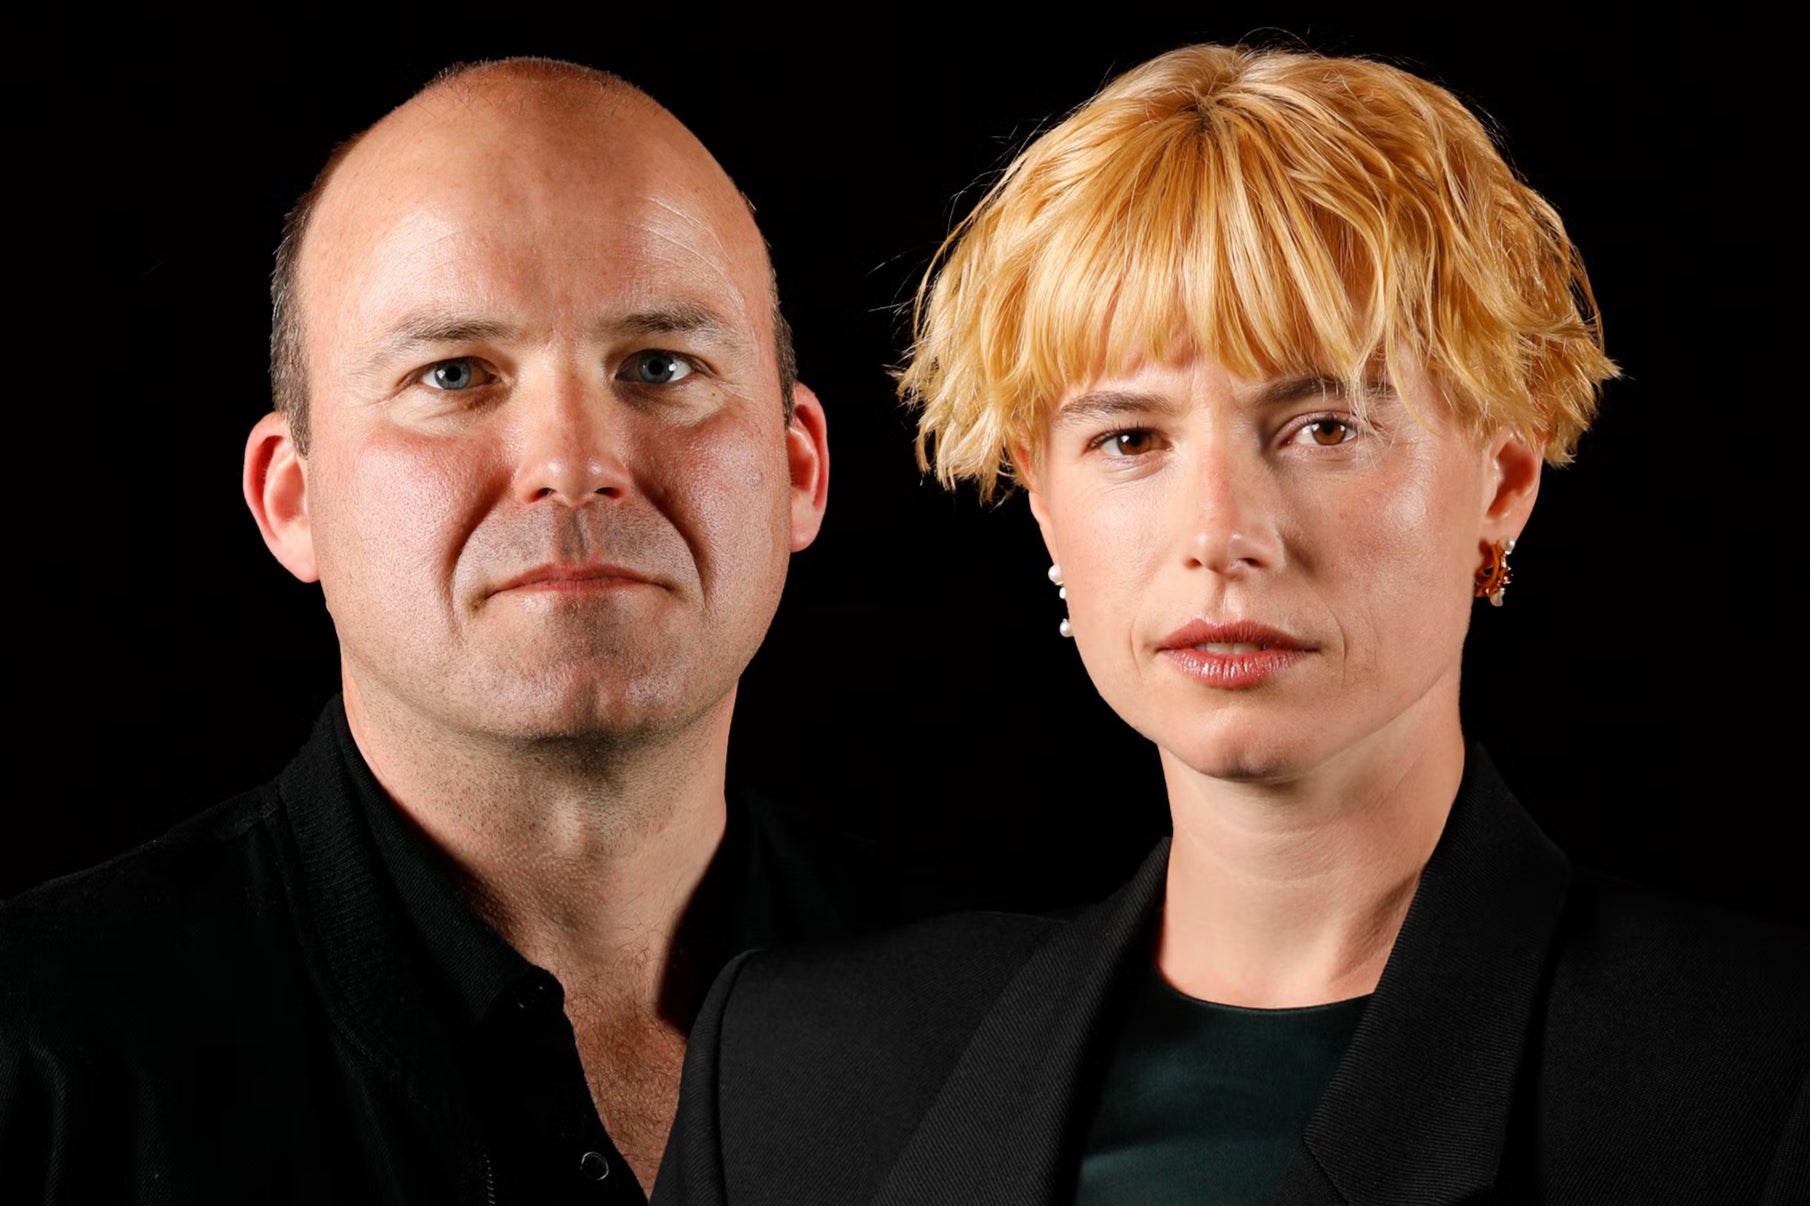 Jessie Buckley and Rory Kinnear interview I like the extremes of opinion Men will instil in people The Independent